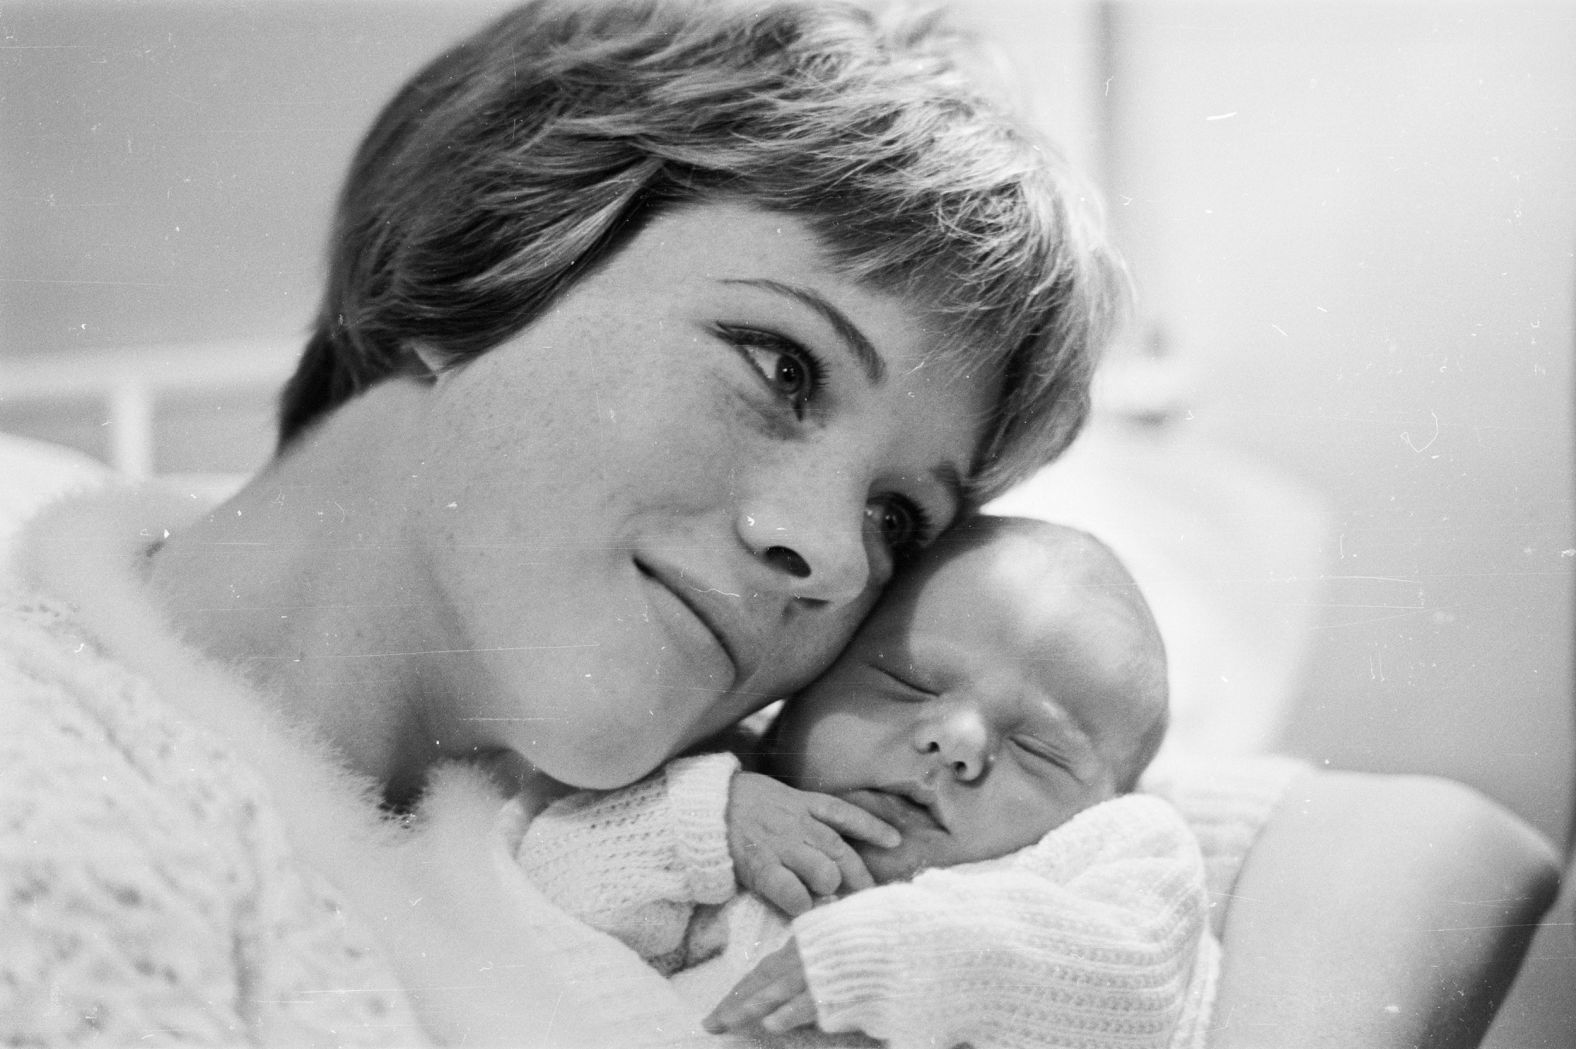 Andrews snuggles with her newborn daughter, Emma, in 1962.